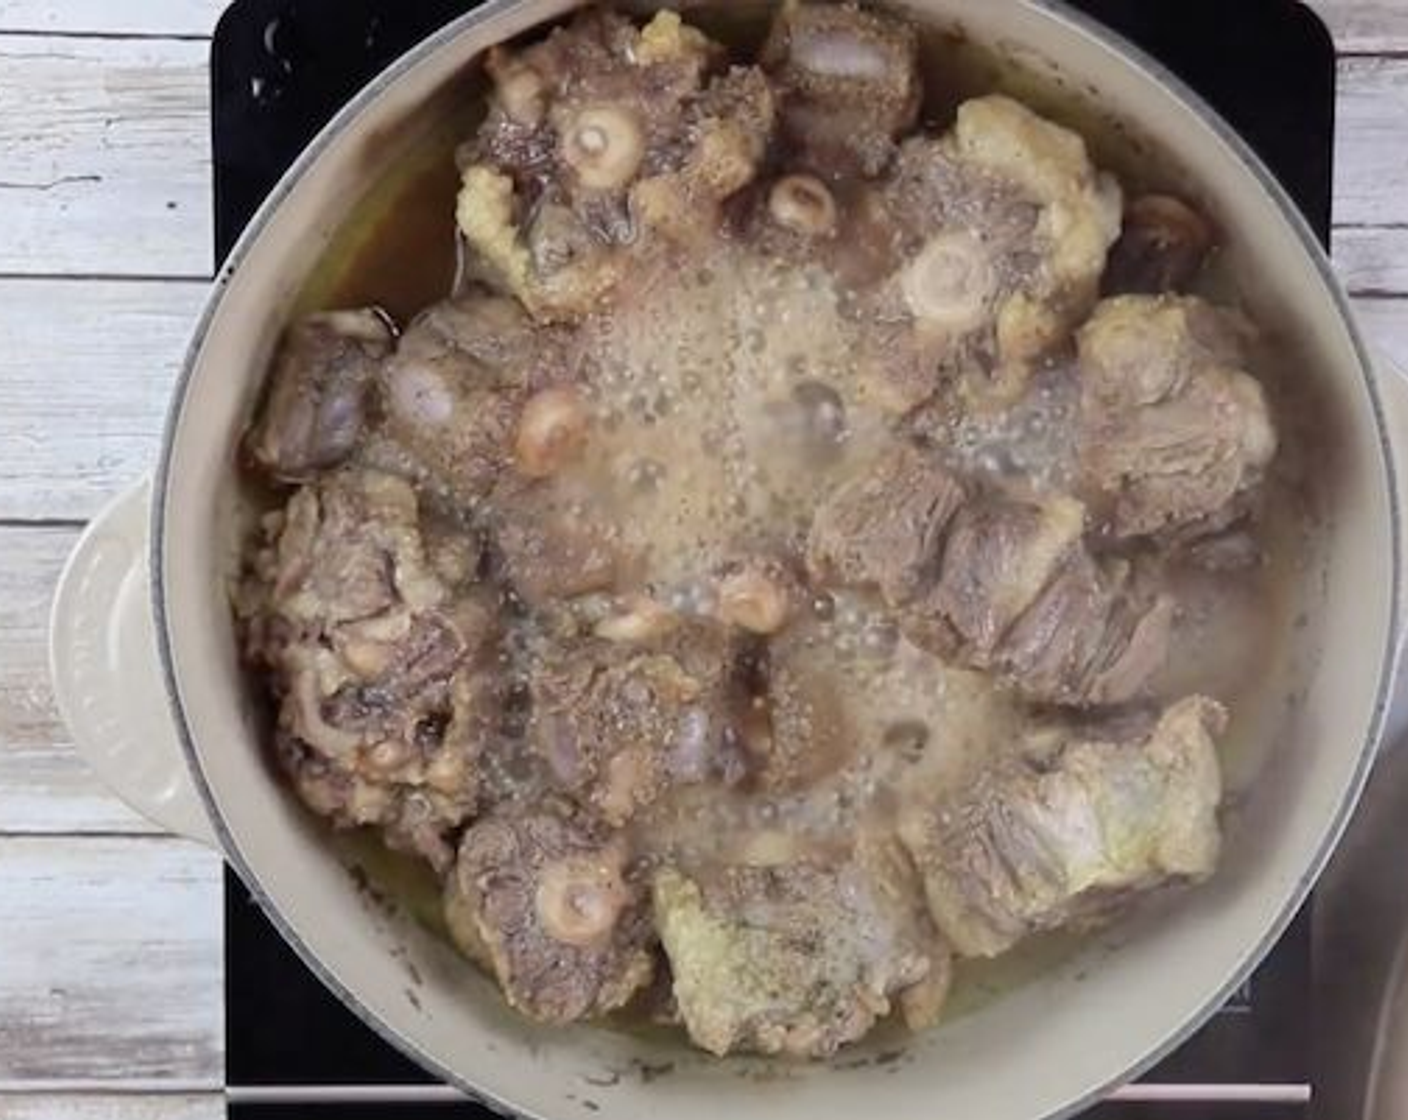 step 2 At medium to low heat, in a Dutch oven deep pot cook the oxtails. Heat Corn Oil (1/3 cup) over low to medium heat and add oxtails. Cover and stir frequently. If the oxtails are thick, it will take about 2-3 hours to cook until tender. Add a bit of water if you feel they are drying out.